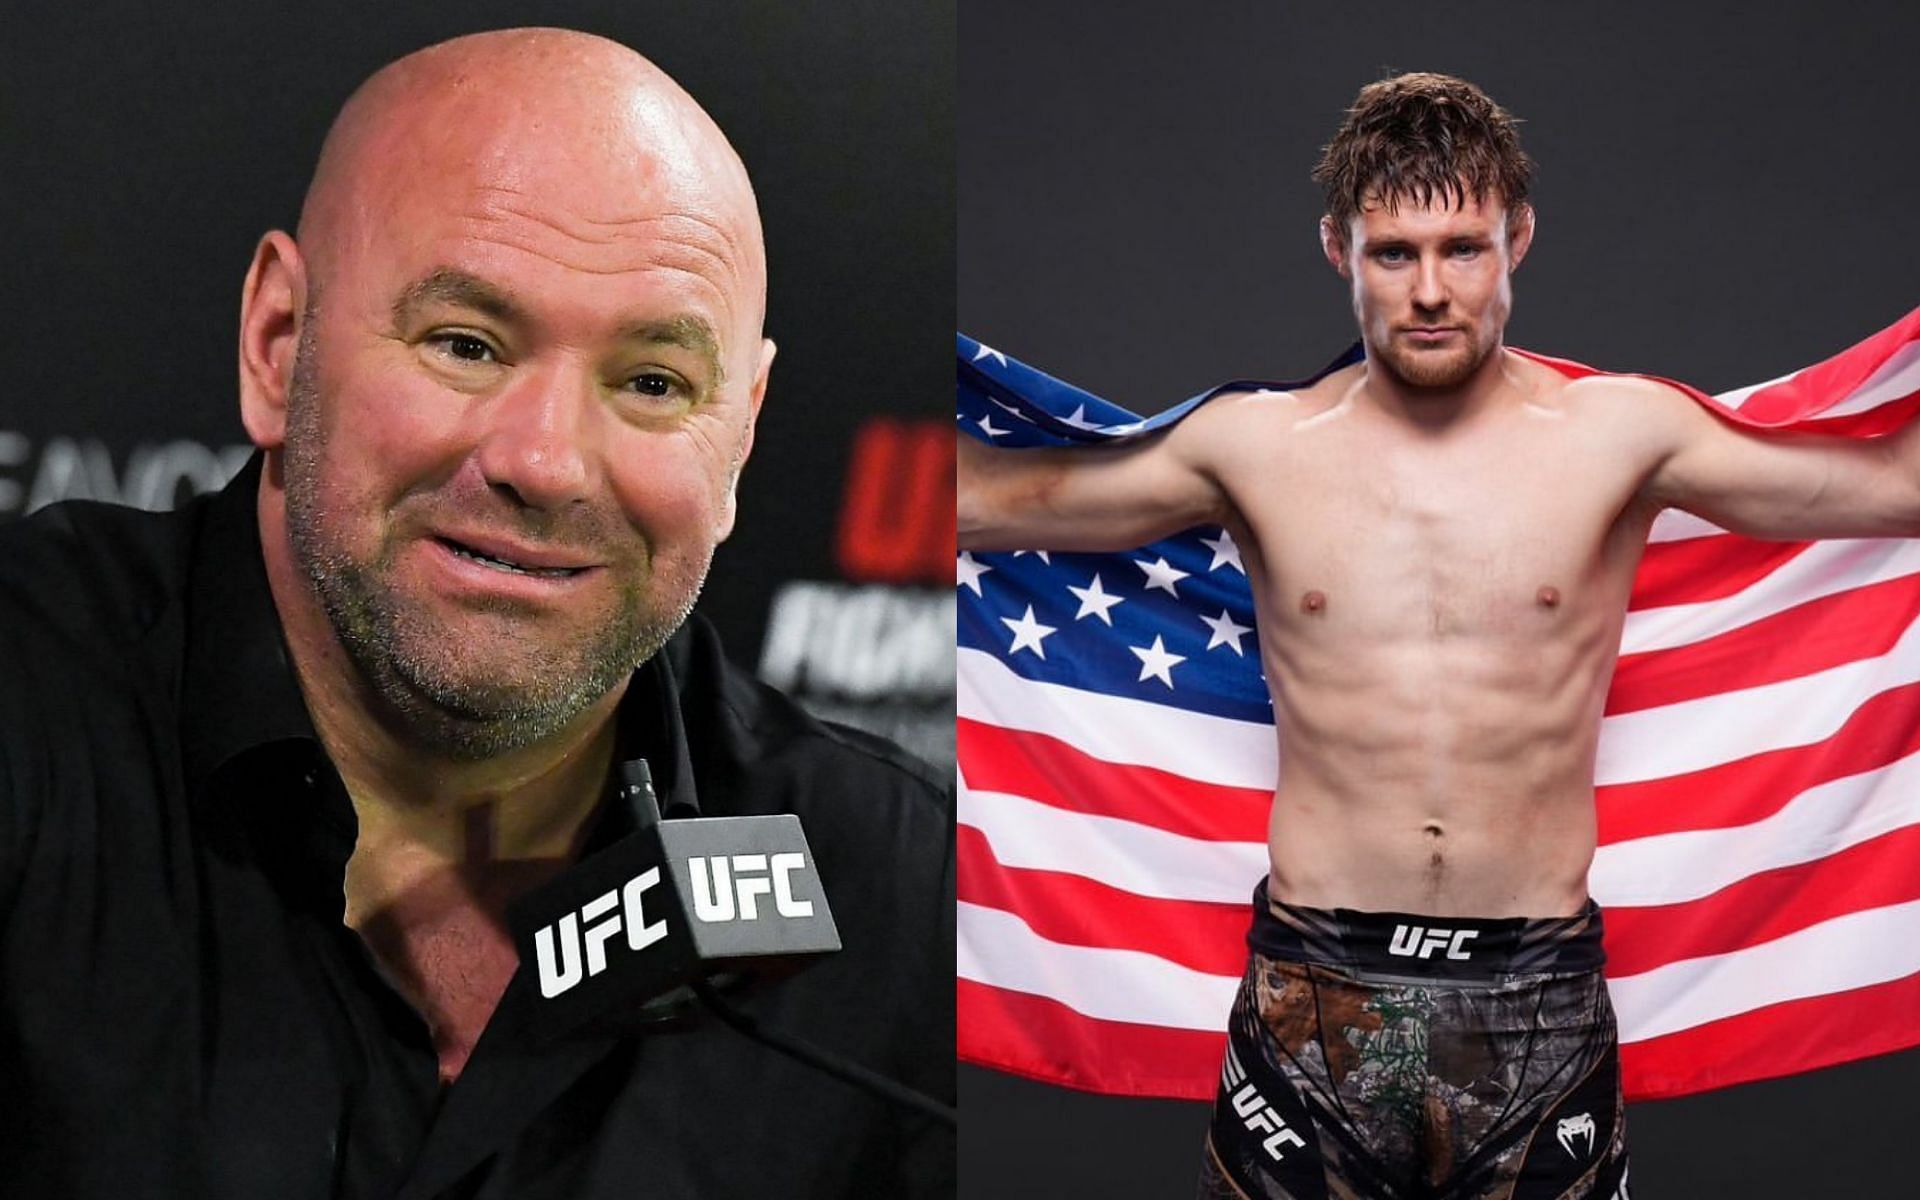 Dana White (left) Bryce Mitchell (right) [Images courtesy: Getty and @thugnasty_ufc via Instagram]